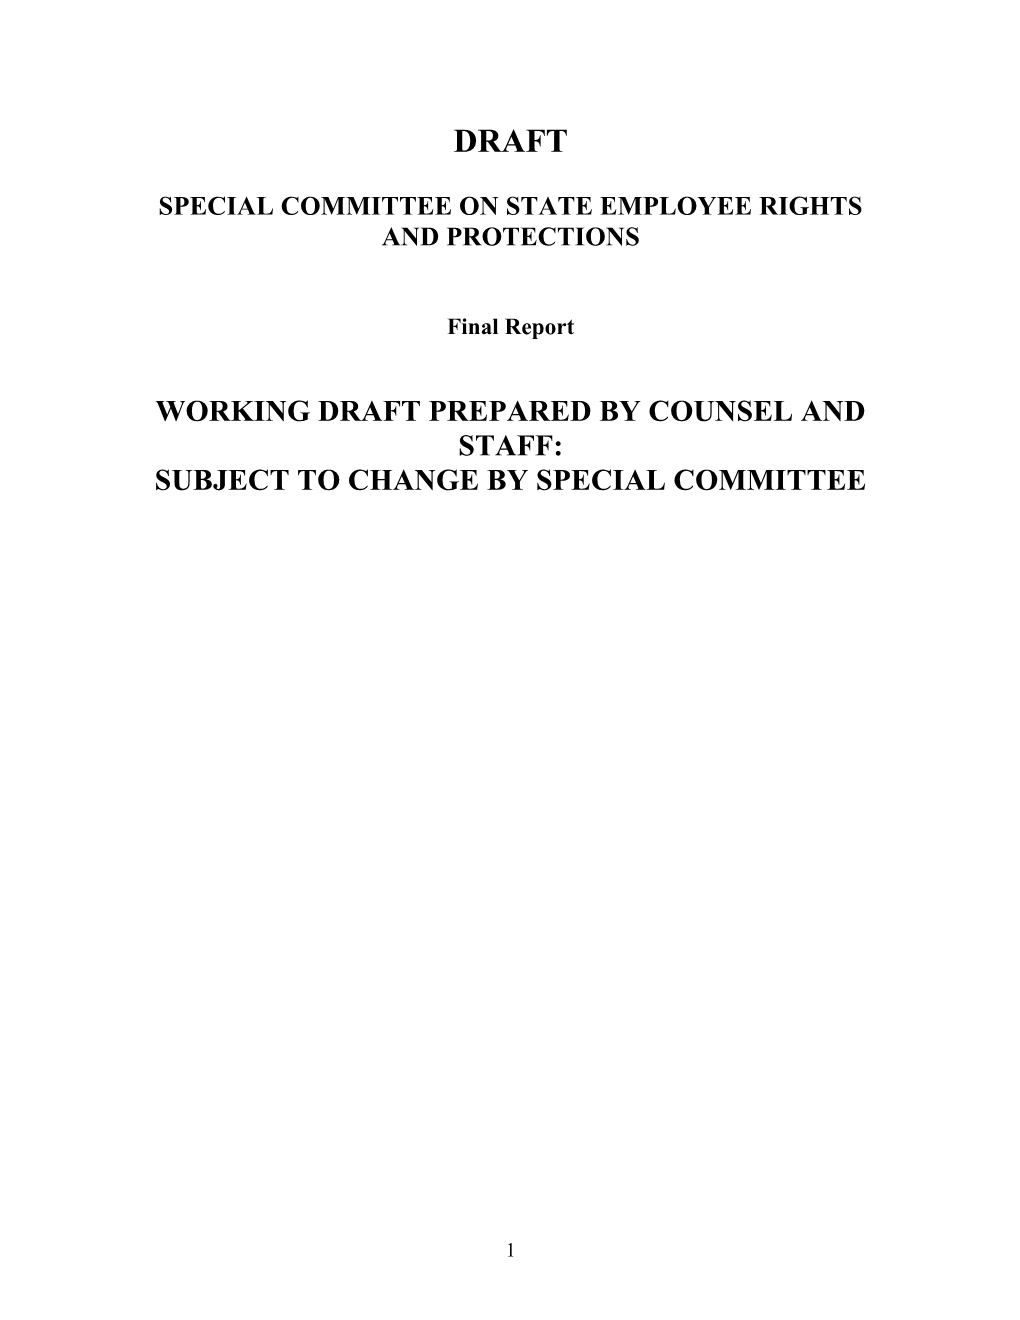 Special Committee on State Employee Rights